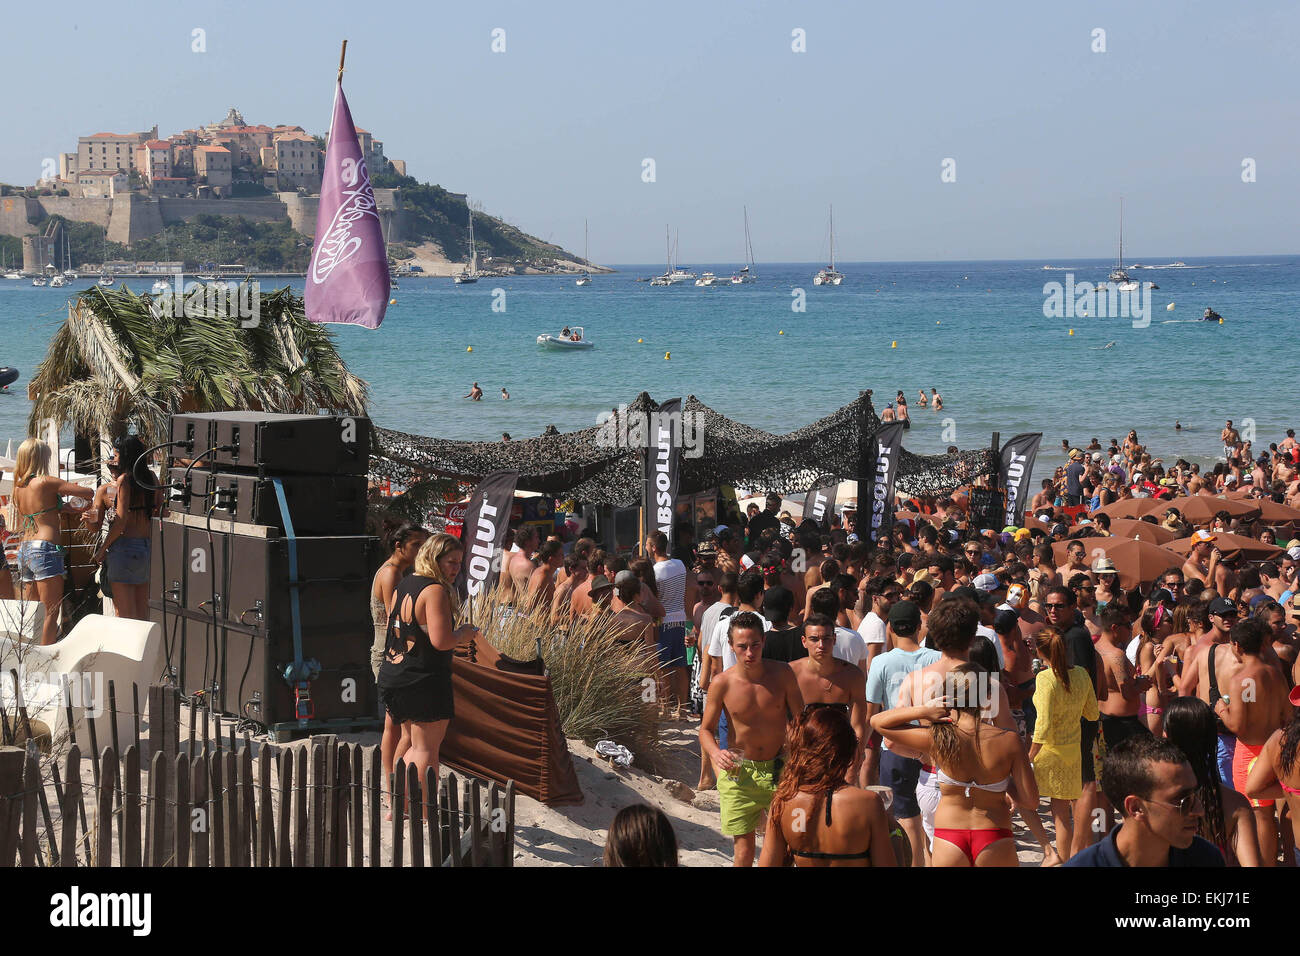 06.JULY.2013. CALVI CALVI ON THE ROCKS FESTIVAL TALES PLACE IN CALVI,  CORSICA FROM JULY 5TH TO 9TH Stock Photo - Alamy